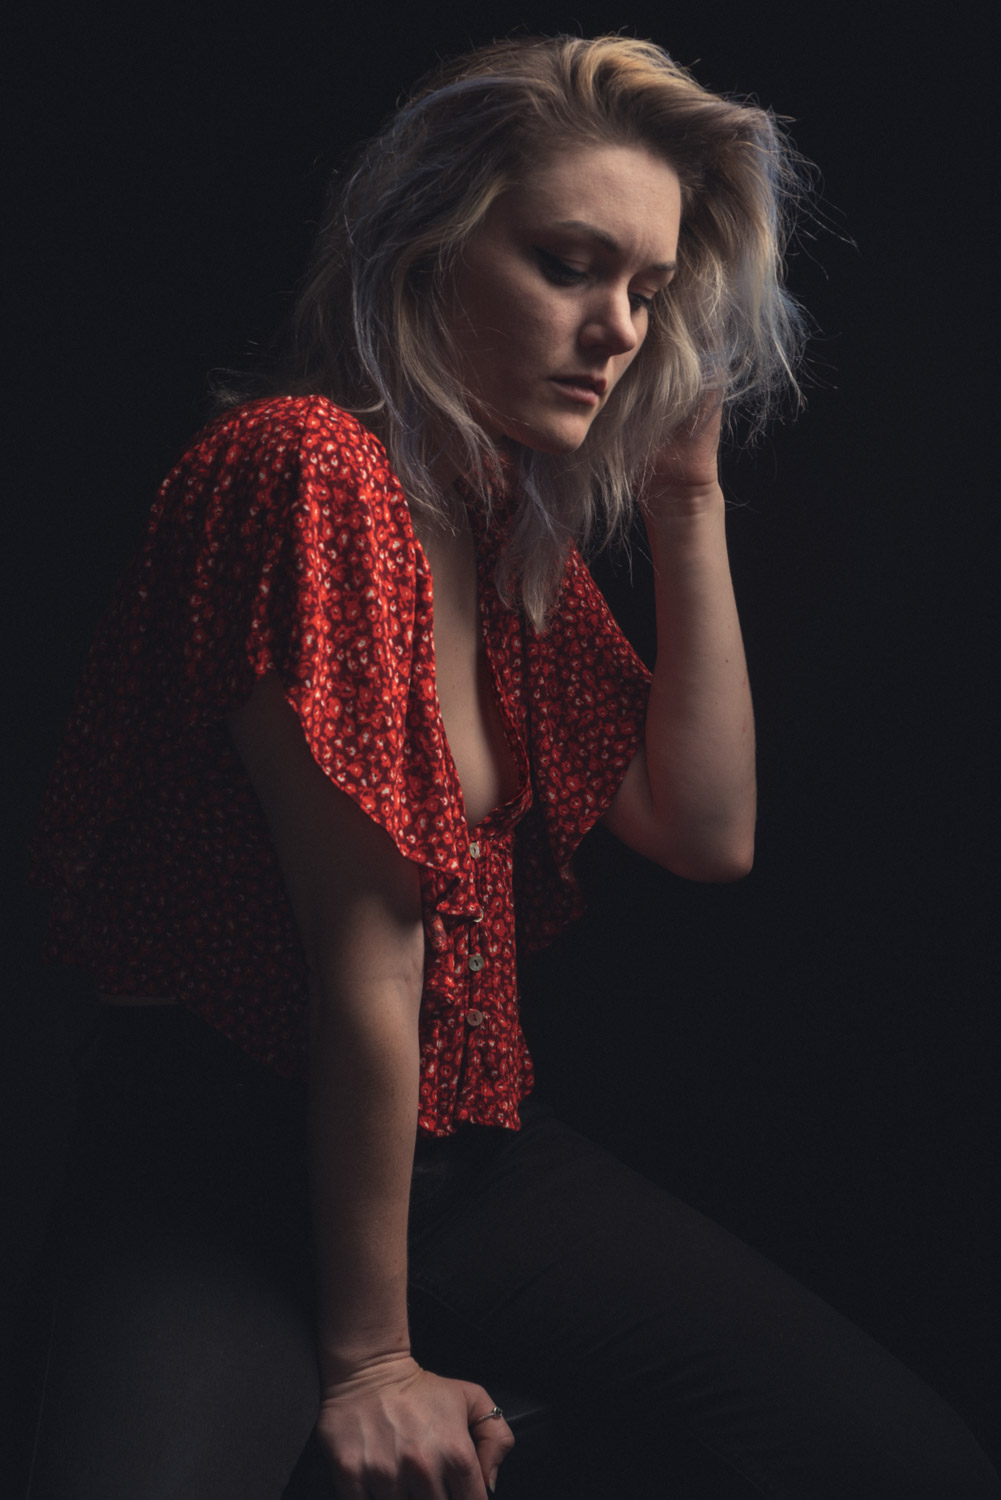 a portrait of Ferring wearing a red blouse, she is sitting on a stool with her hand leaning on the stool and one arm in her hair. she is sitting against a black background.